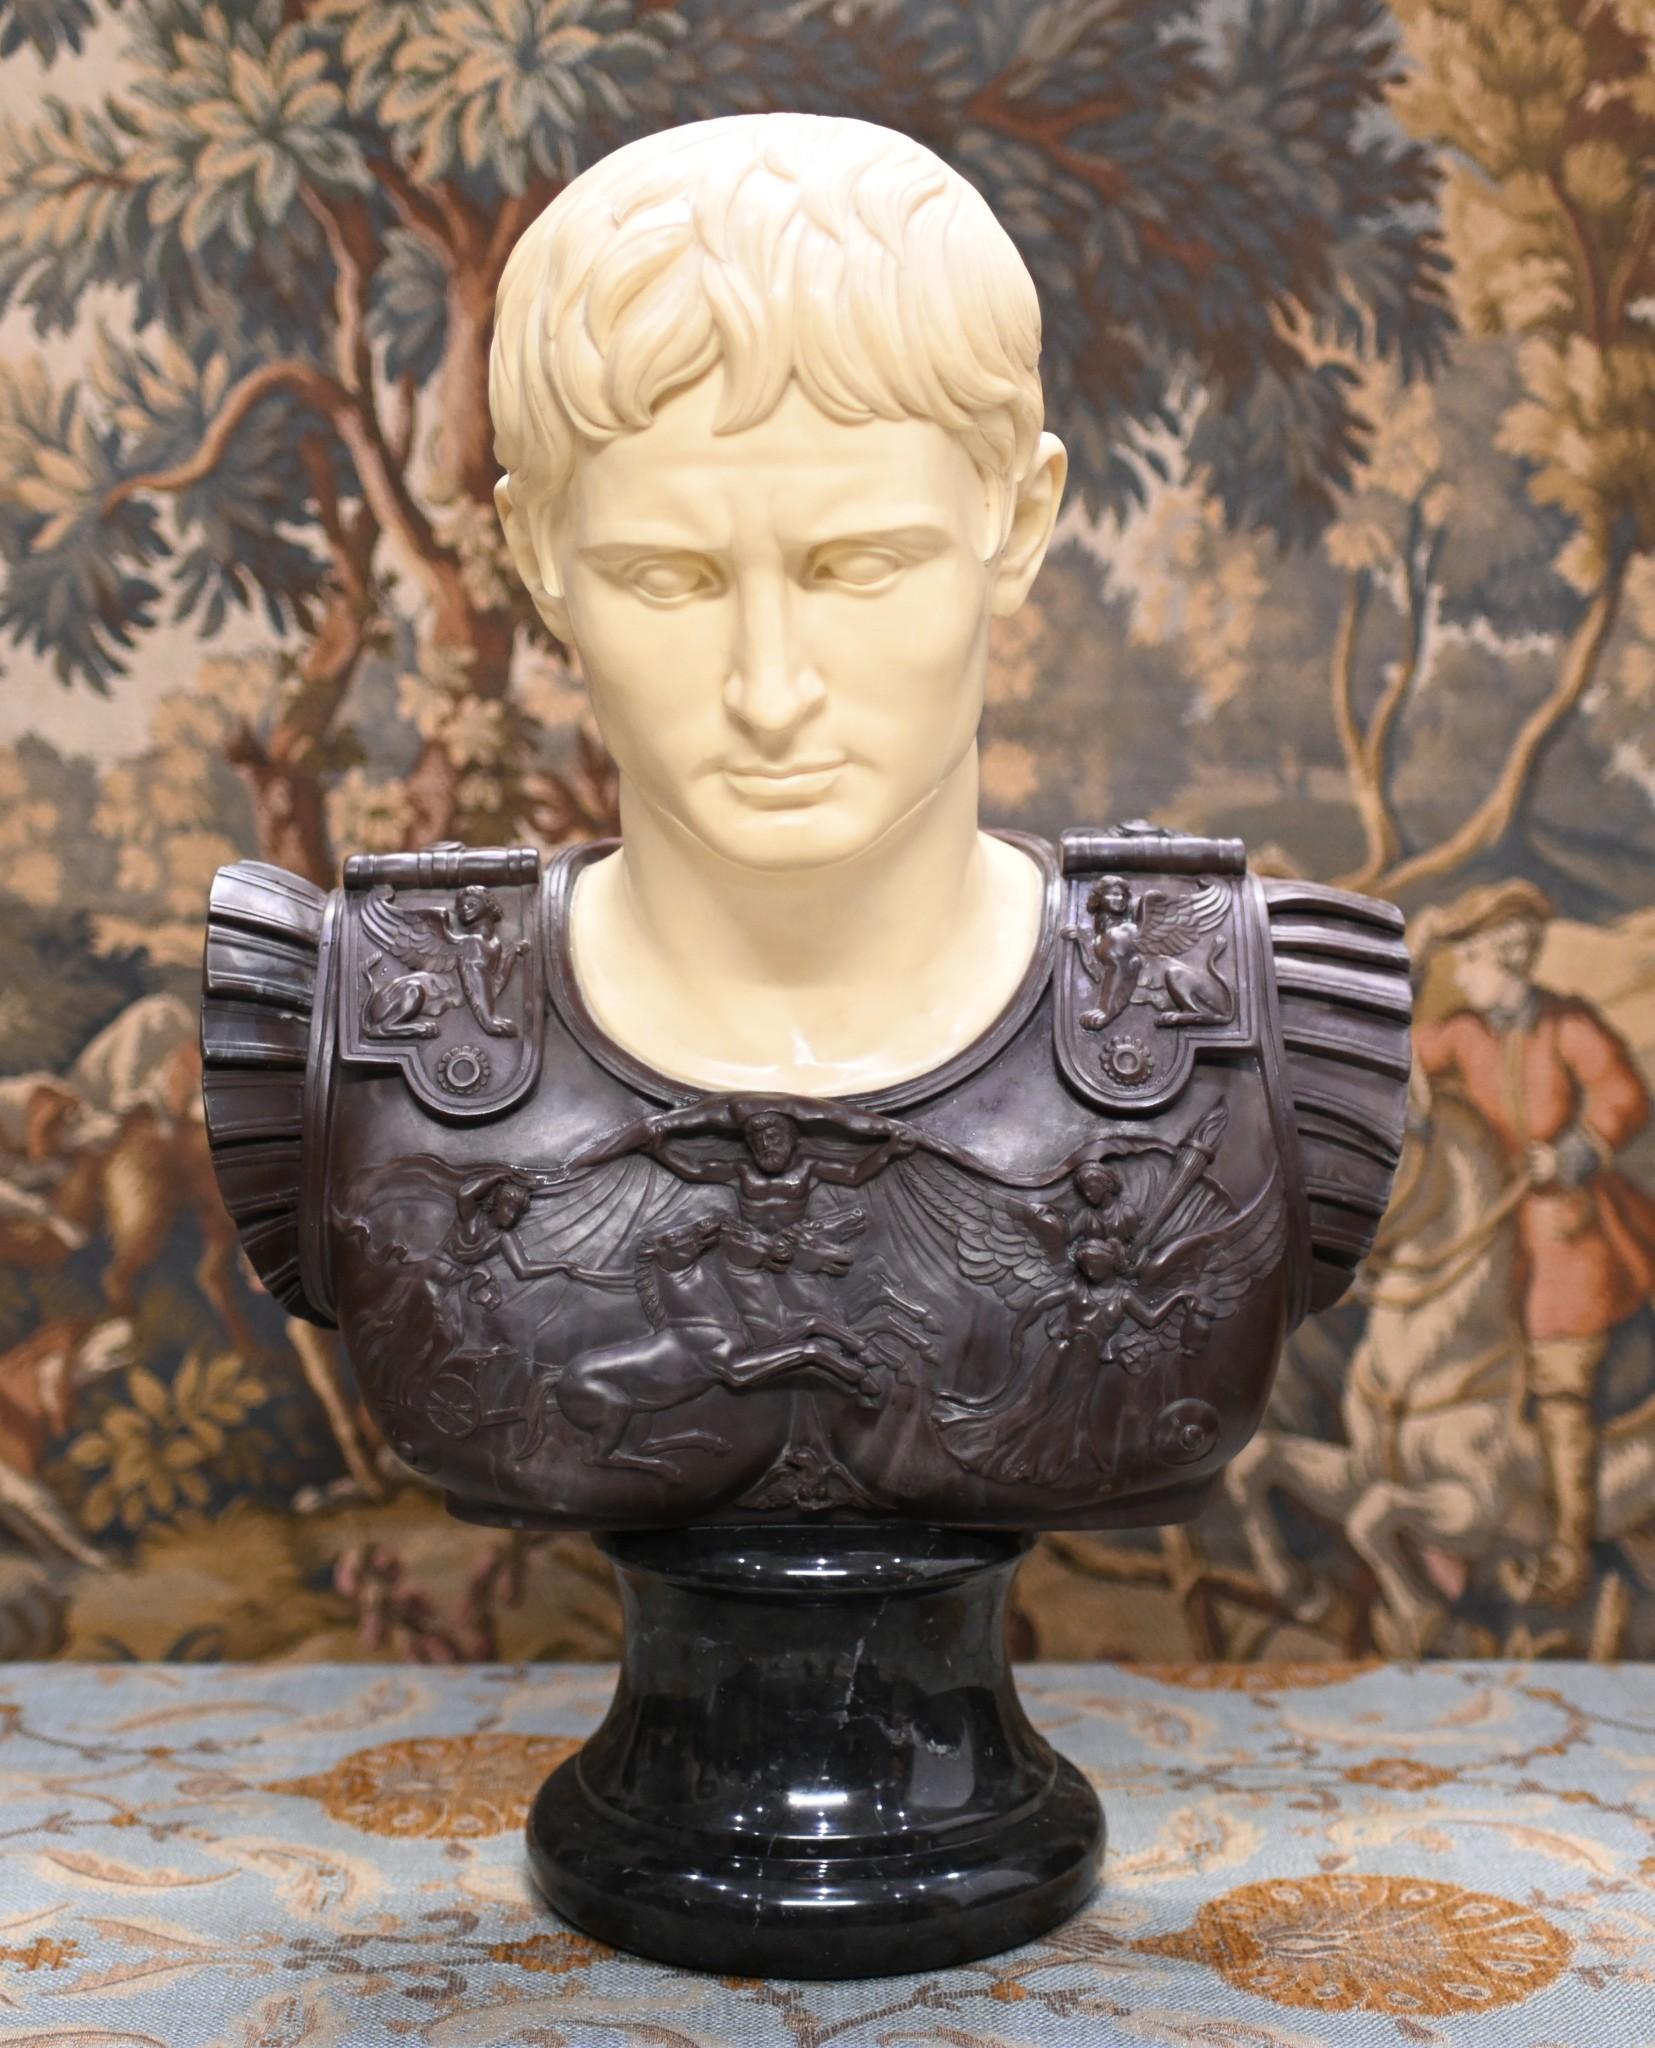 Hail Caesar!
Wonderful Italian Grand Tour bust of Roman Emperor Julius Caesar
Great version of the classic Caesar pose
White marble for the neck and head, brown for his tunic top and black for the soccle
Great hand carved relief work to the tunic